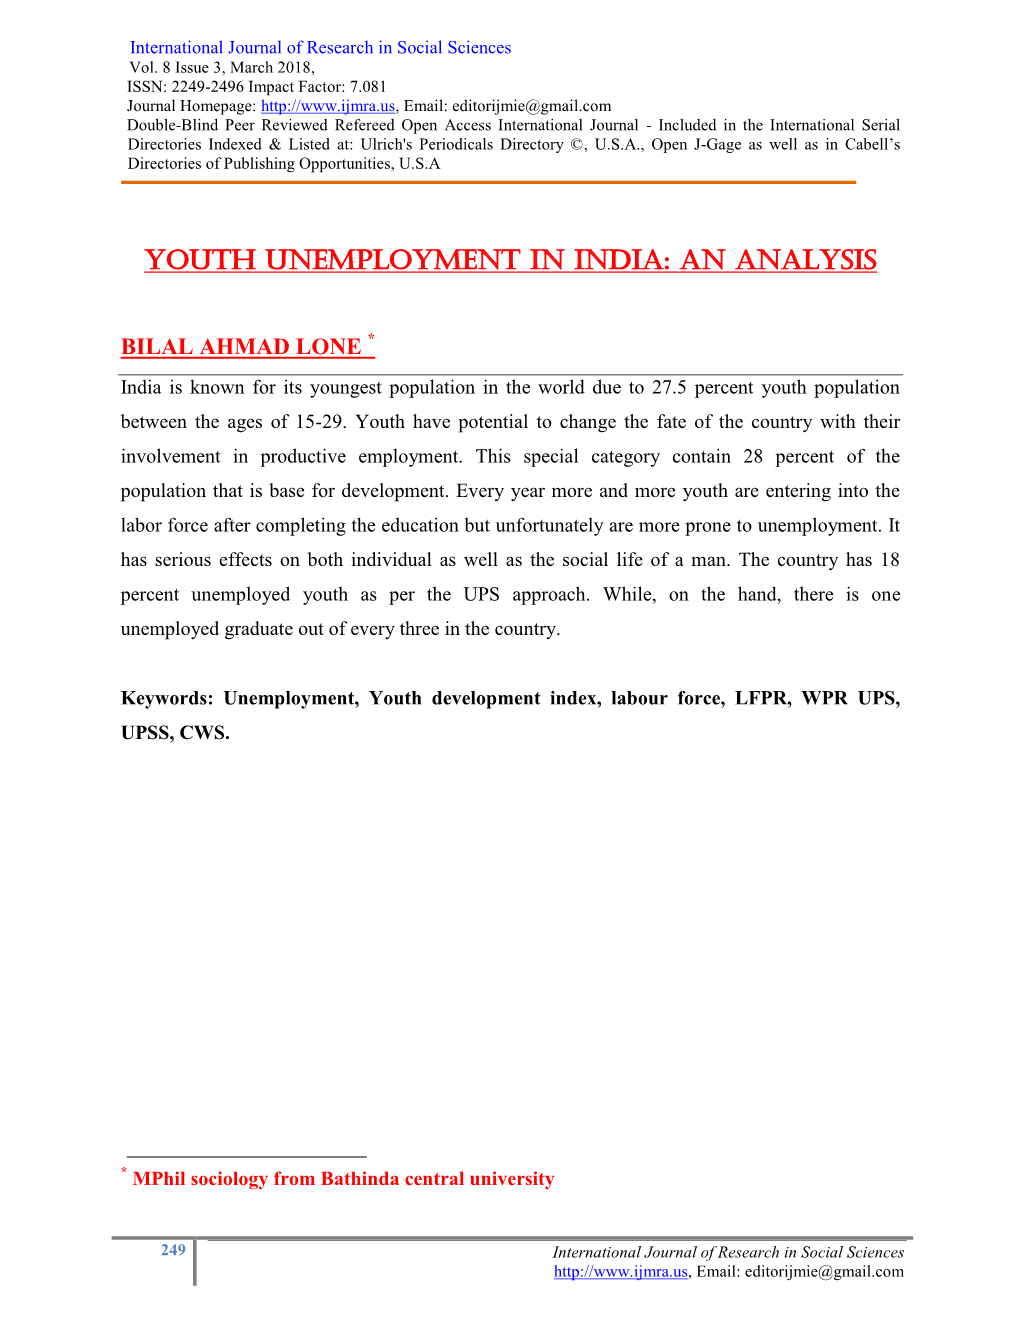 Youth Unemployment in India: an Analysis